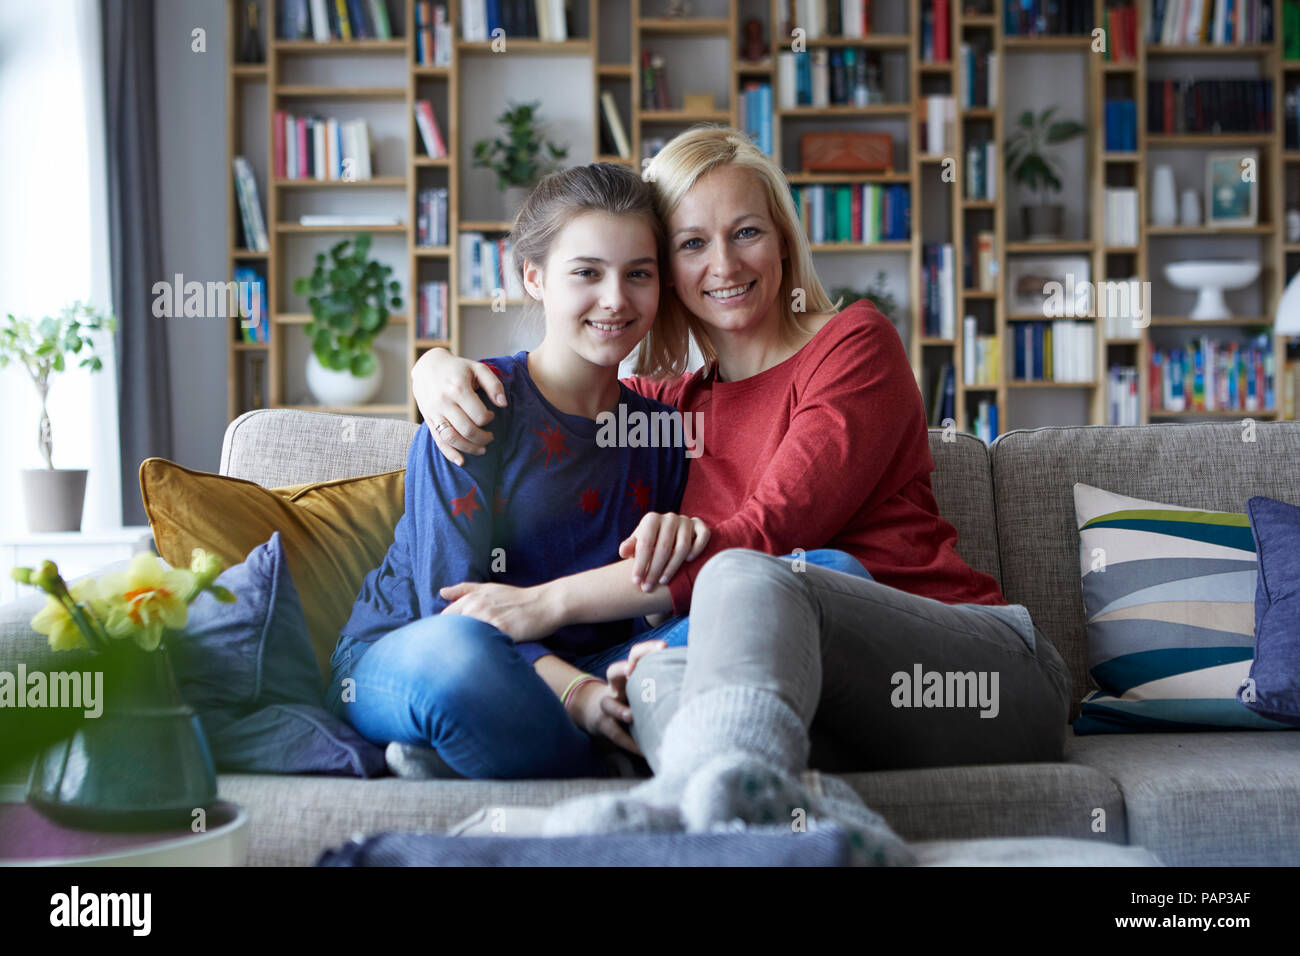 Mother and adolescent daughter sitting on couch with arms around Stock Photo